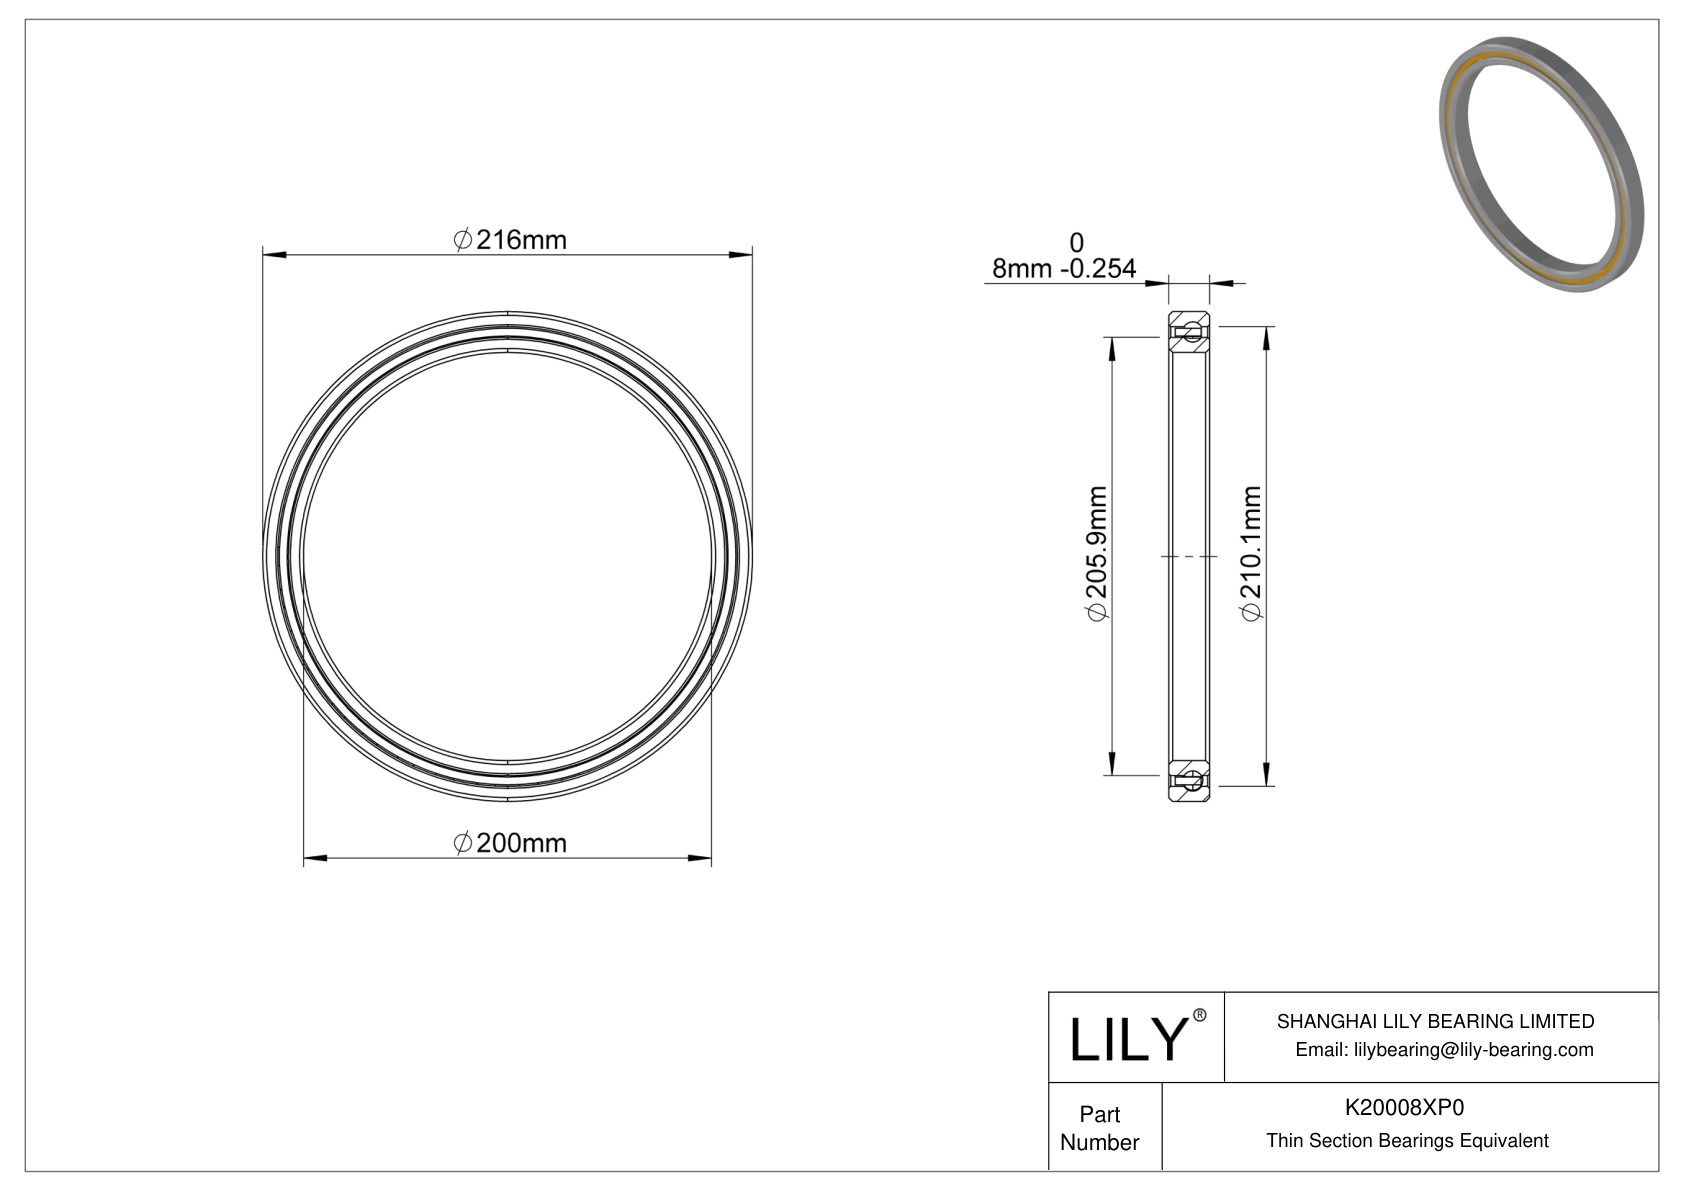 K20008XP0 Constant Section (CS) Bearings cad drawing